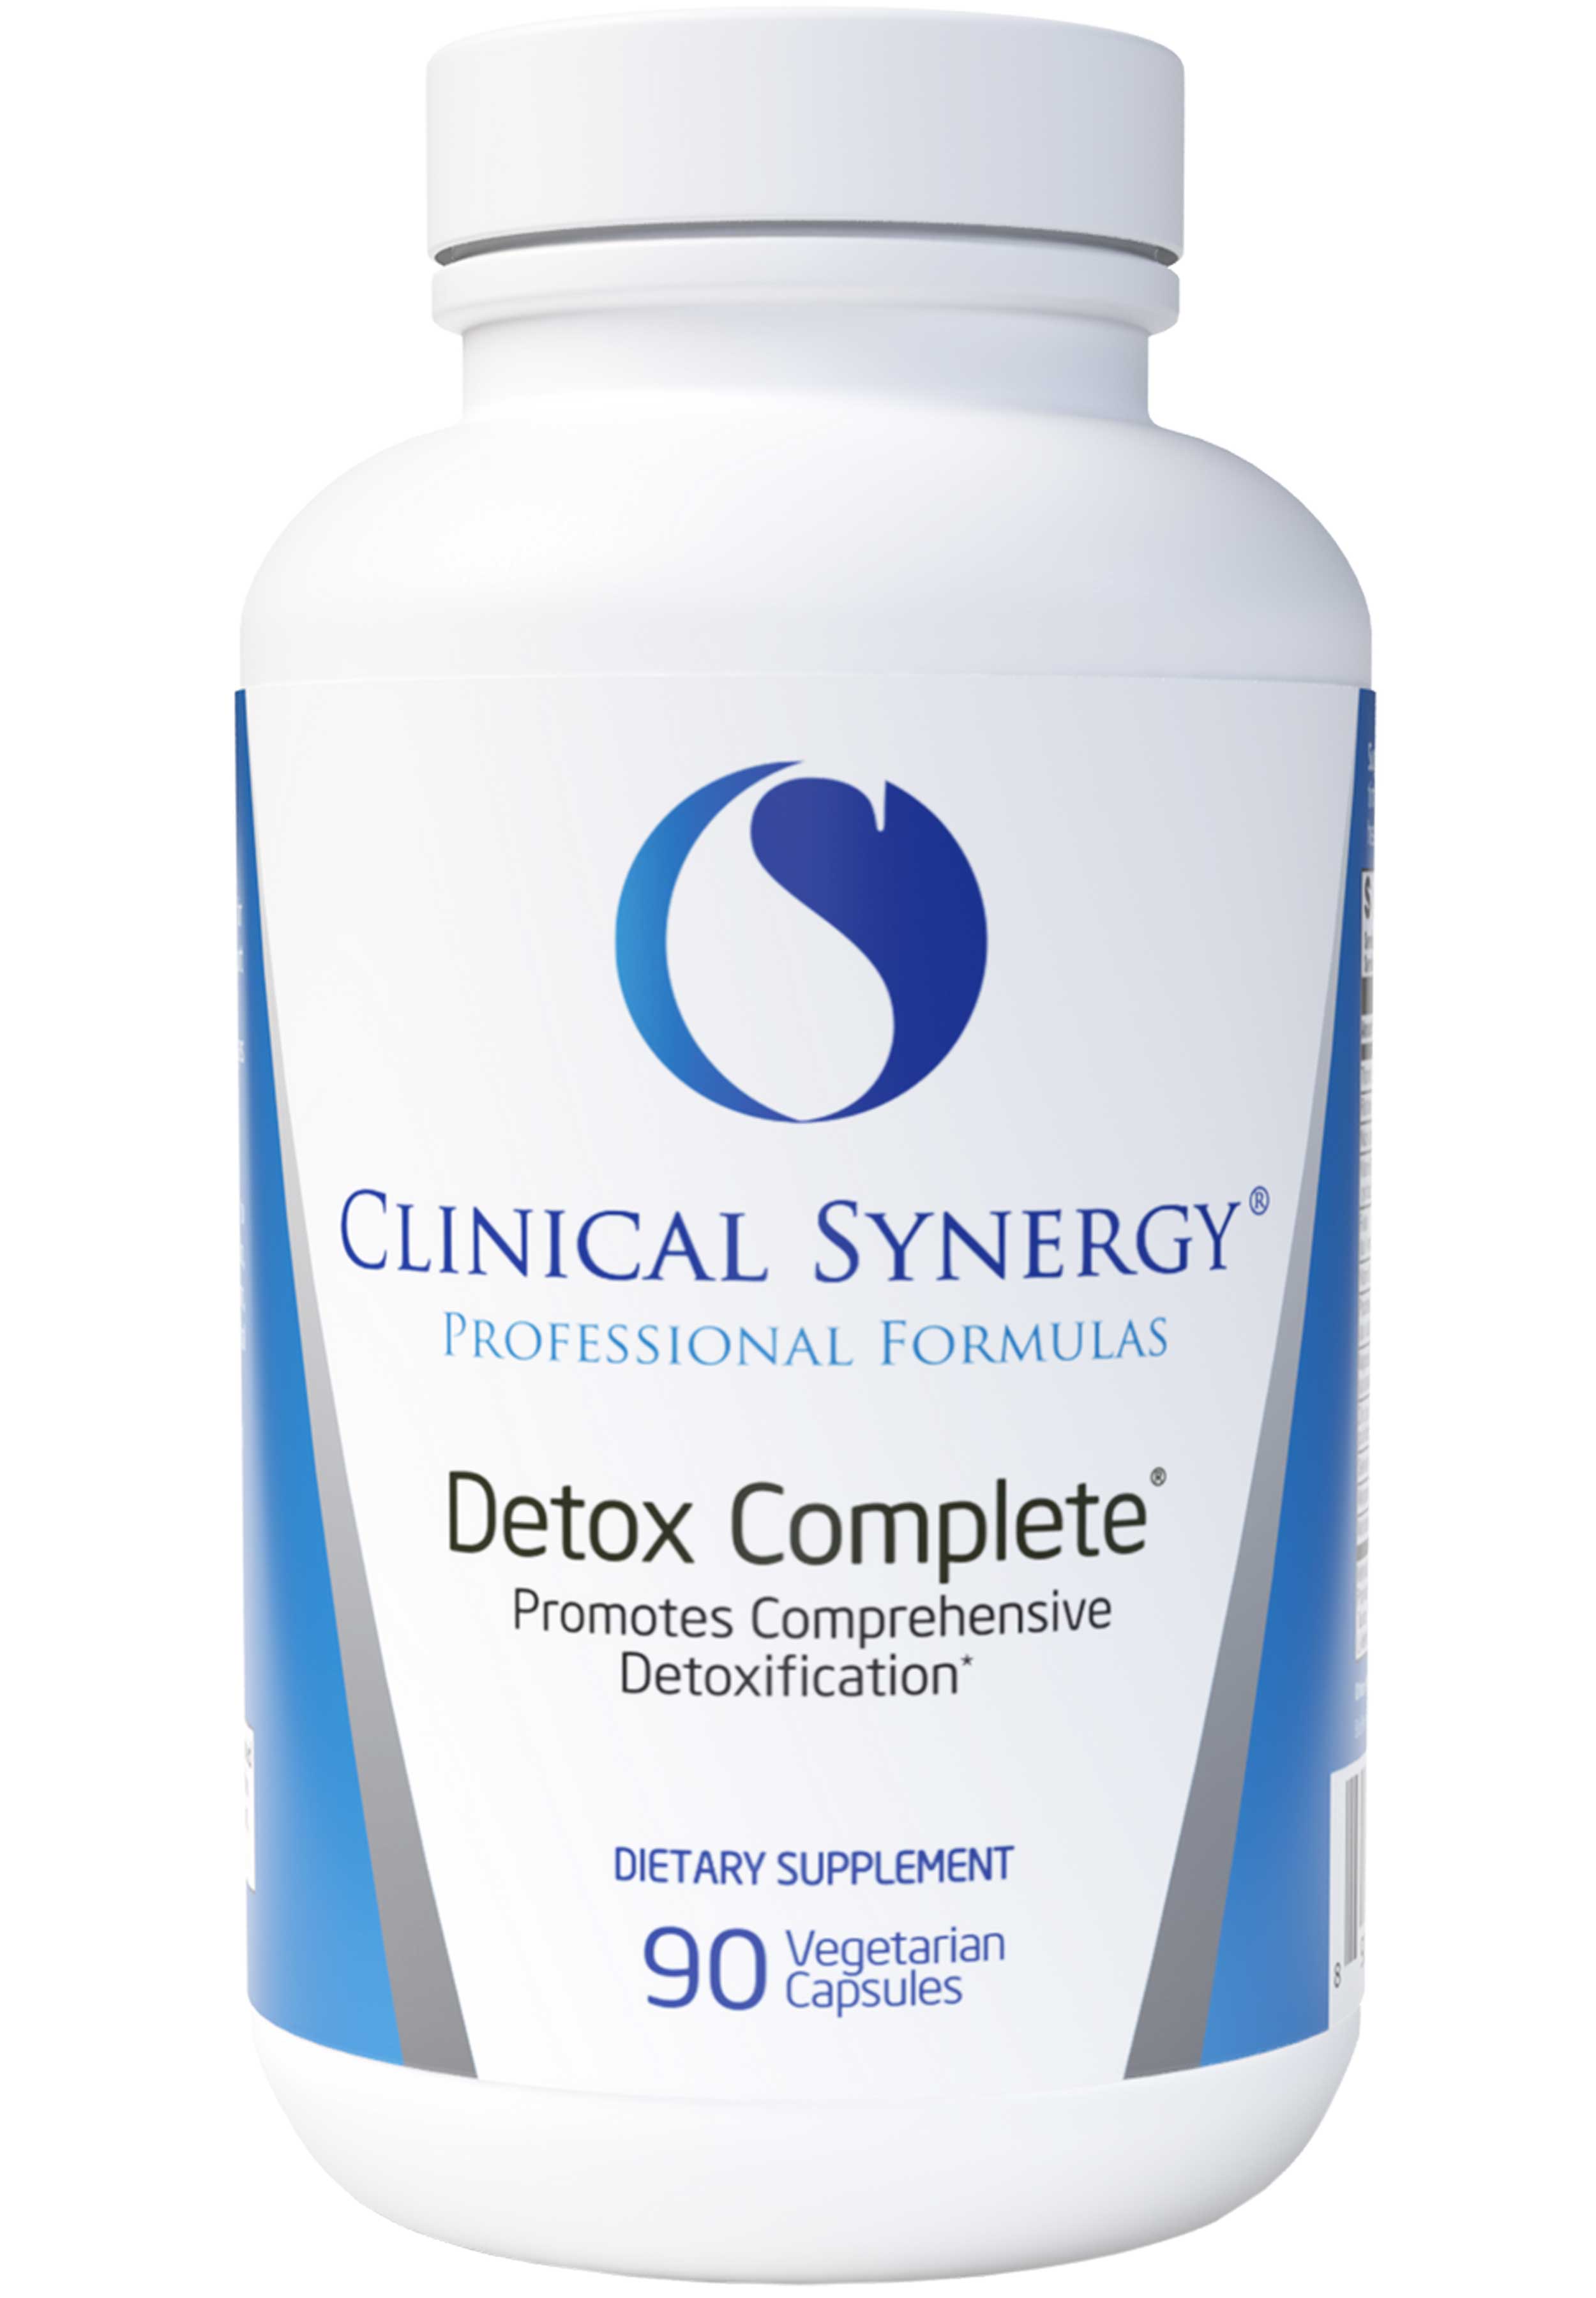 Clinical Synergy Professional Formulas Detox Complete 